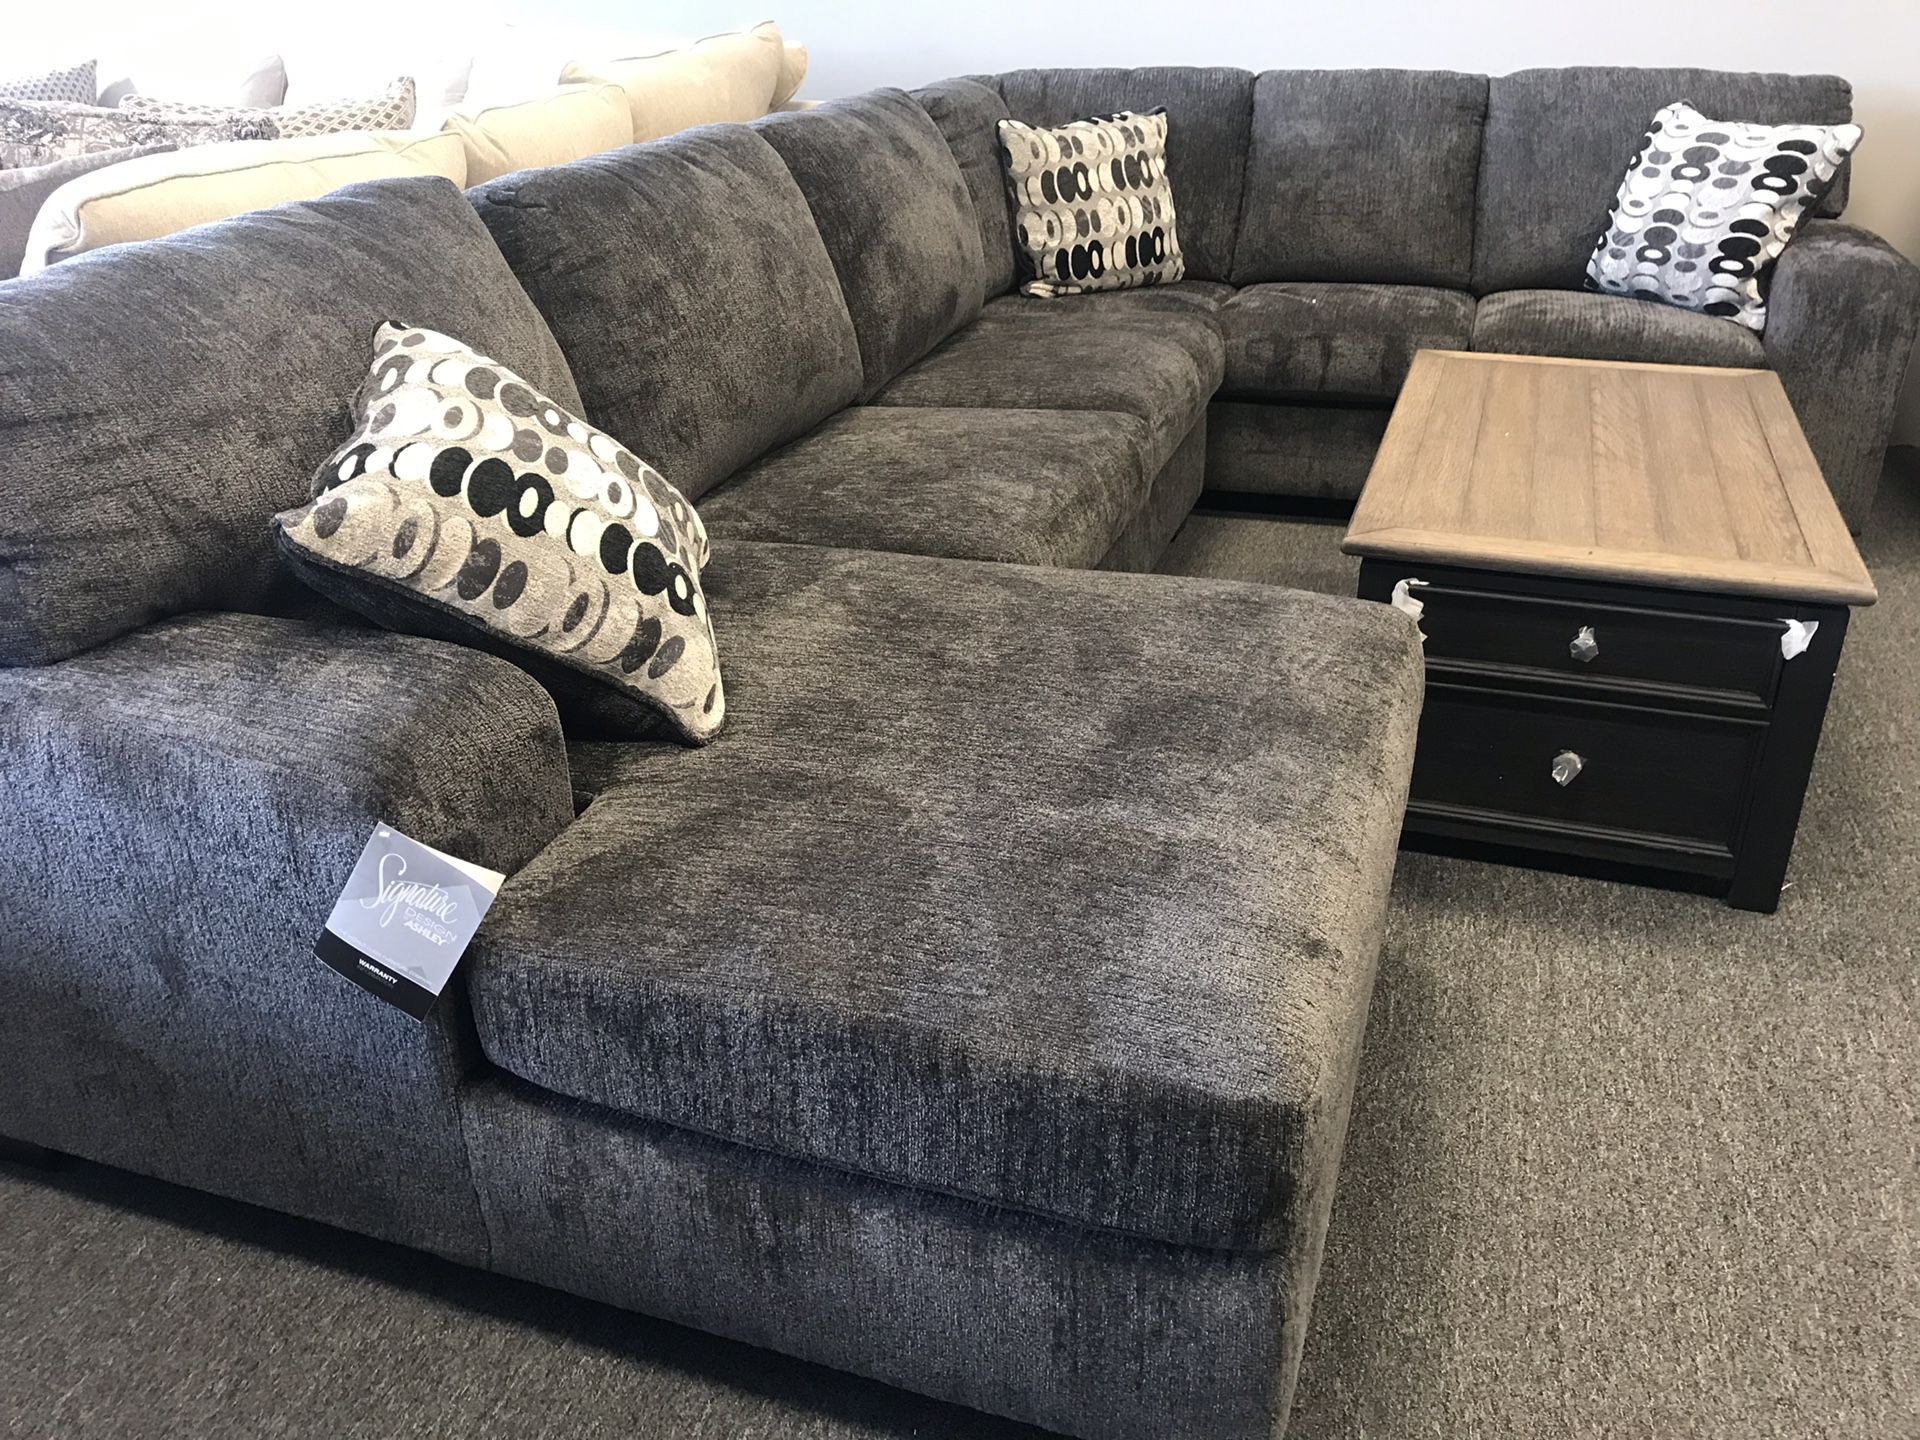 Ashley grey sectional left or right facing chaise available sells for $1999. We have 2 left $59 down takes it or holds on layaway